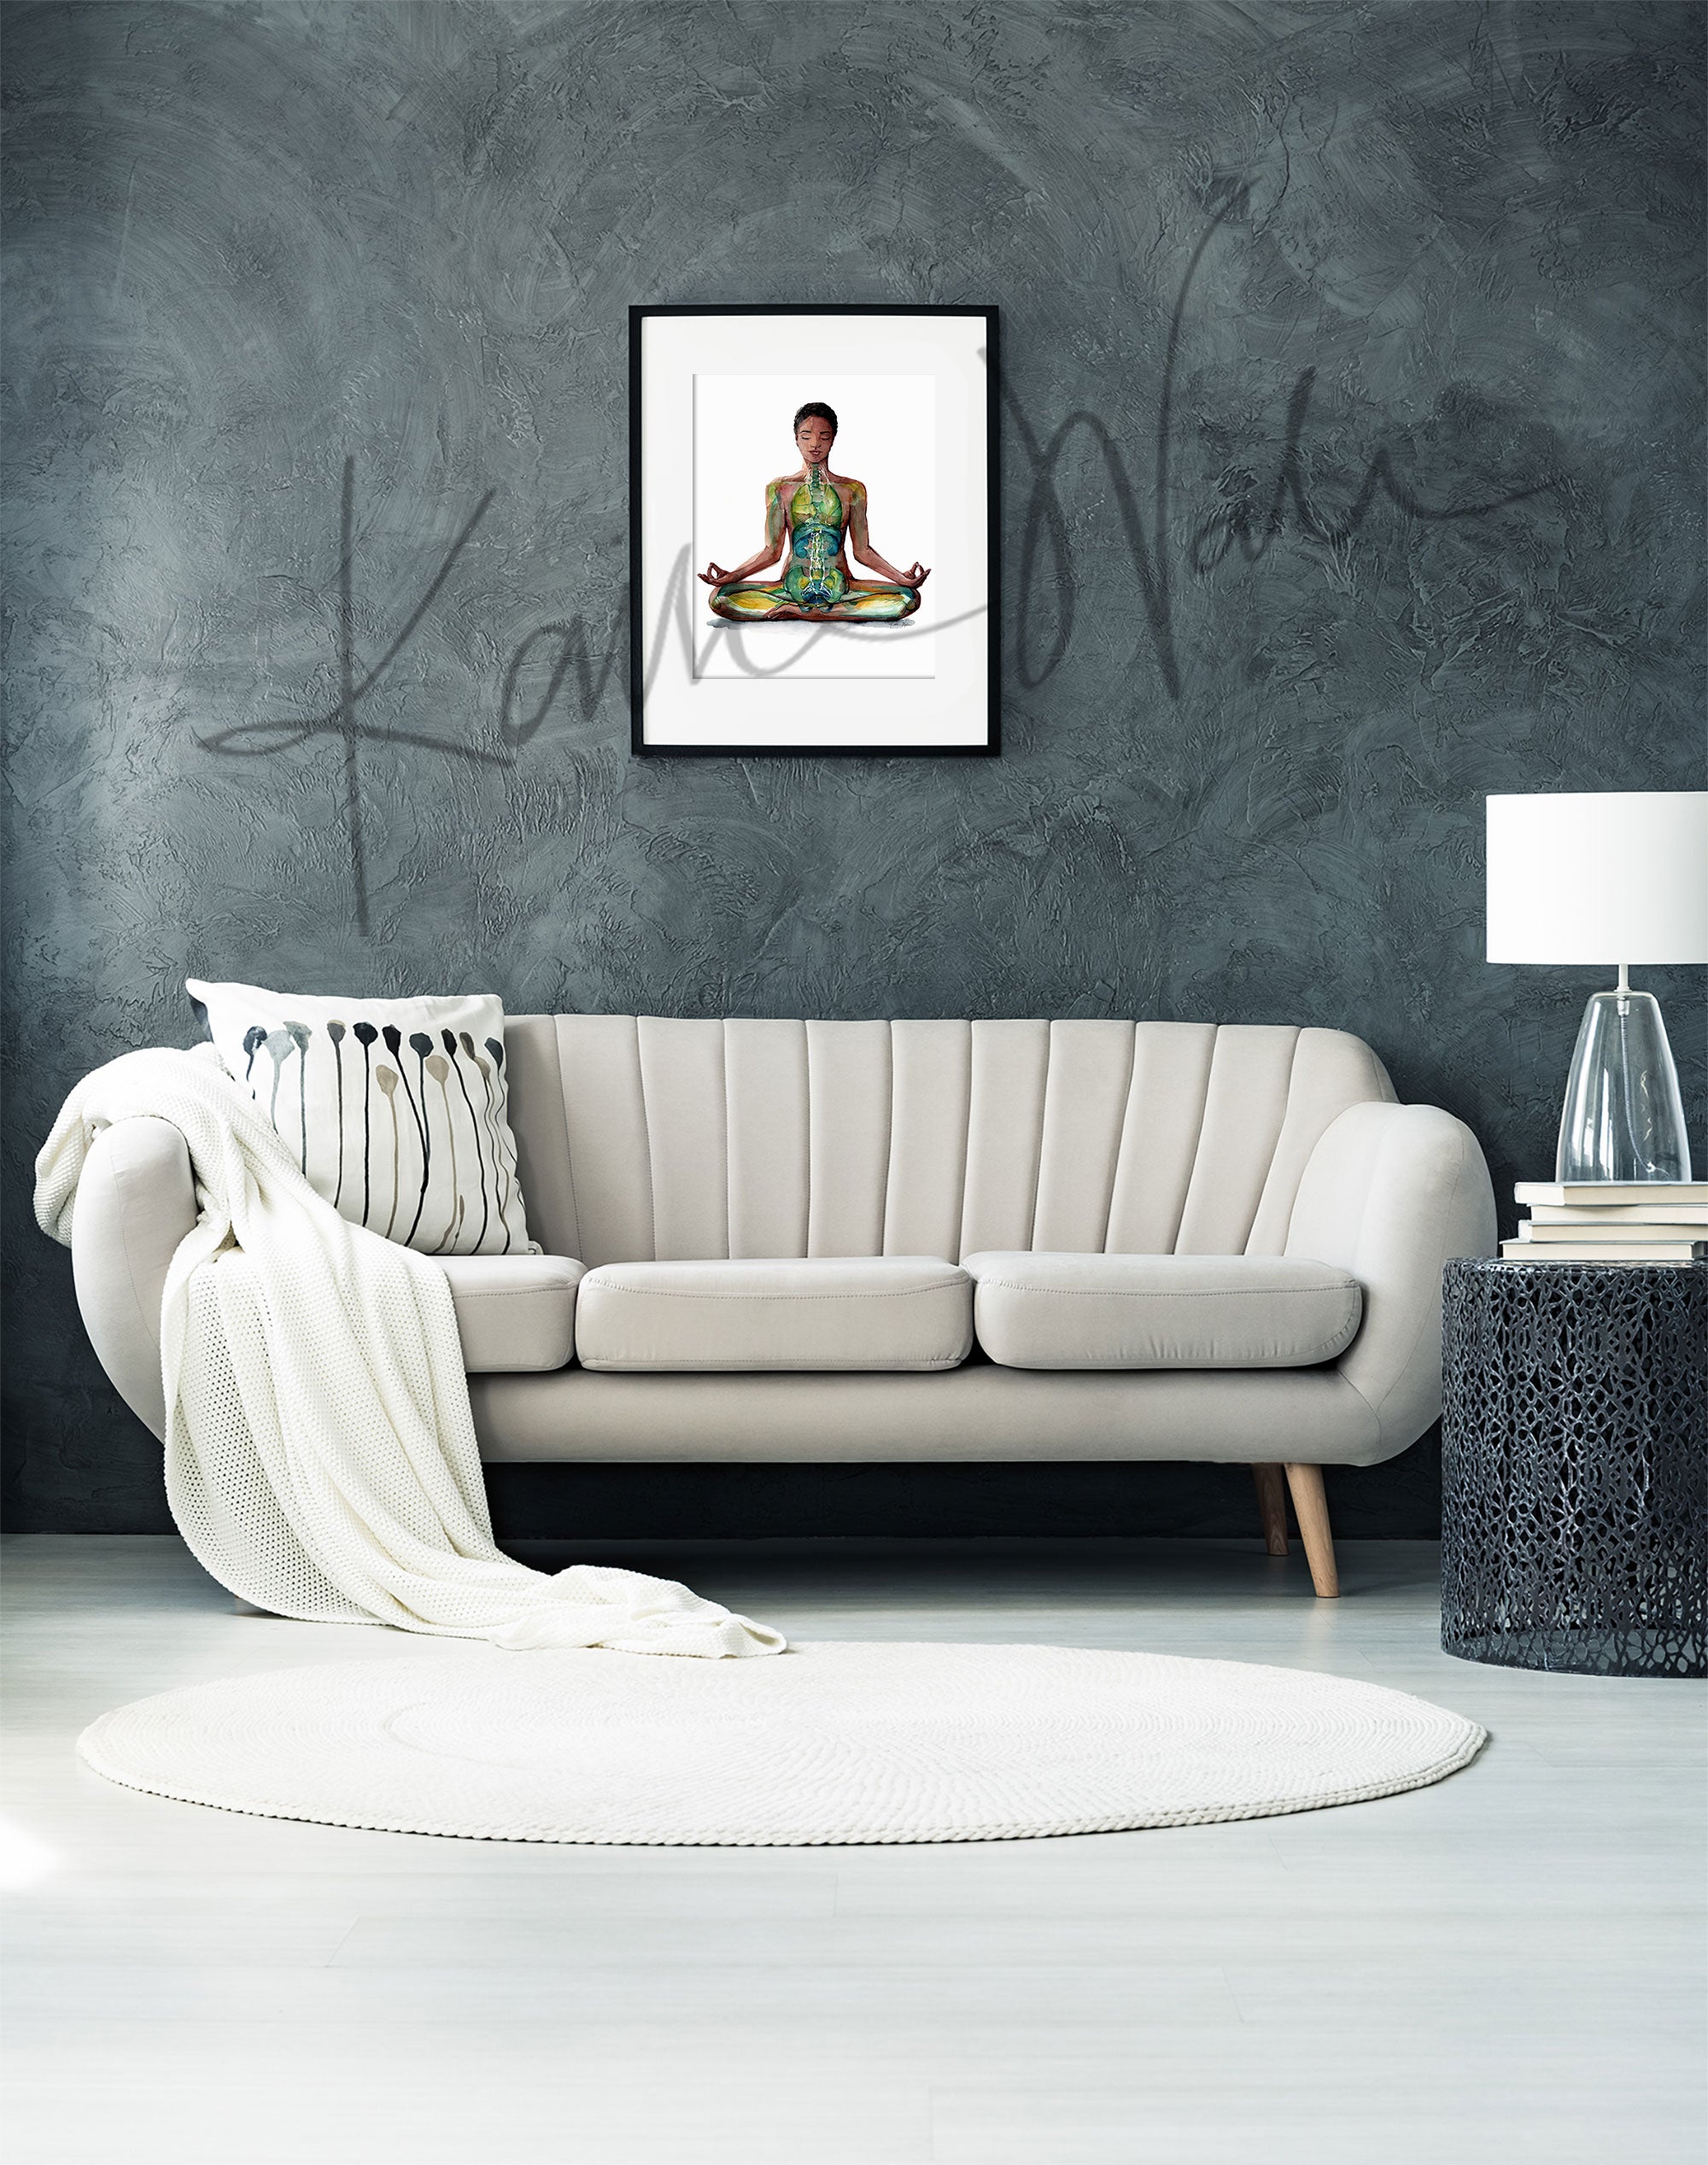 Framed watercolor painting of a woman of color in a peaceful yoga pose. The painting is hanging over a white couch.